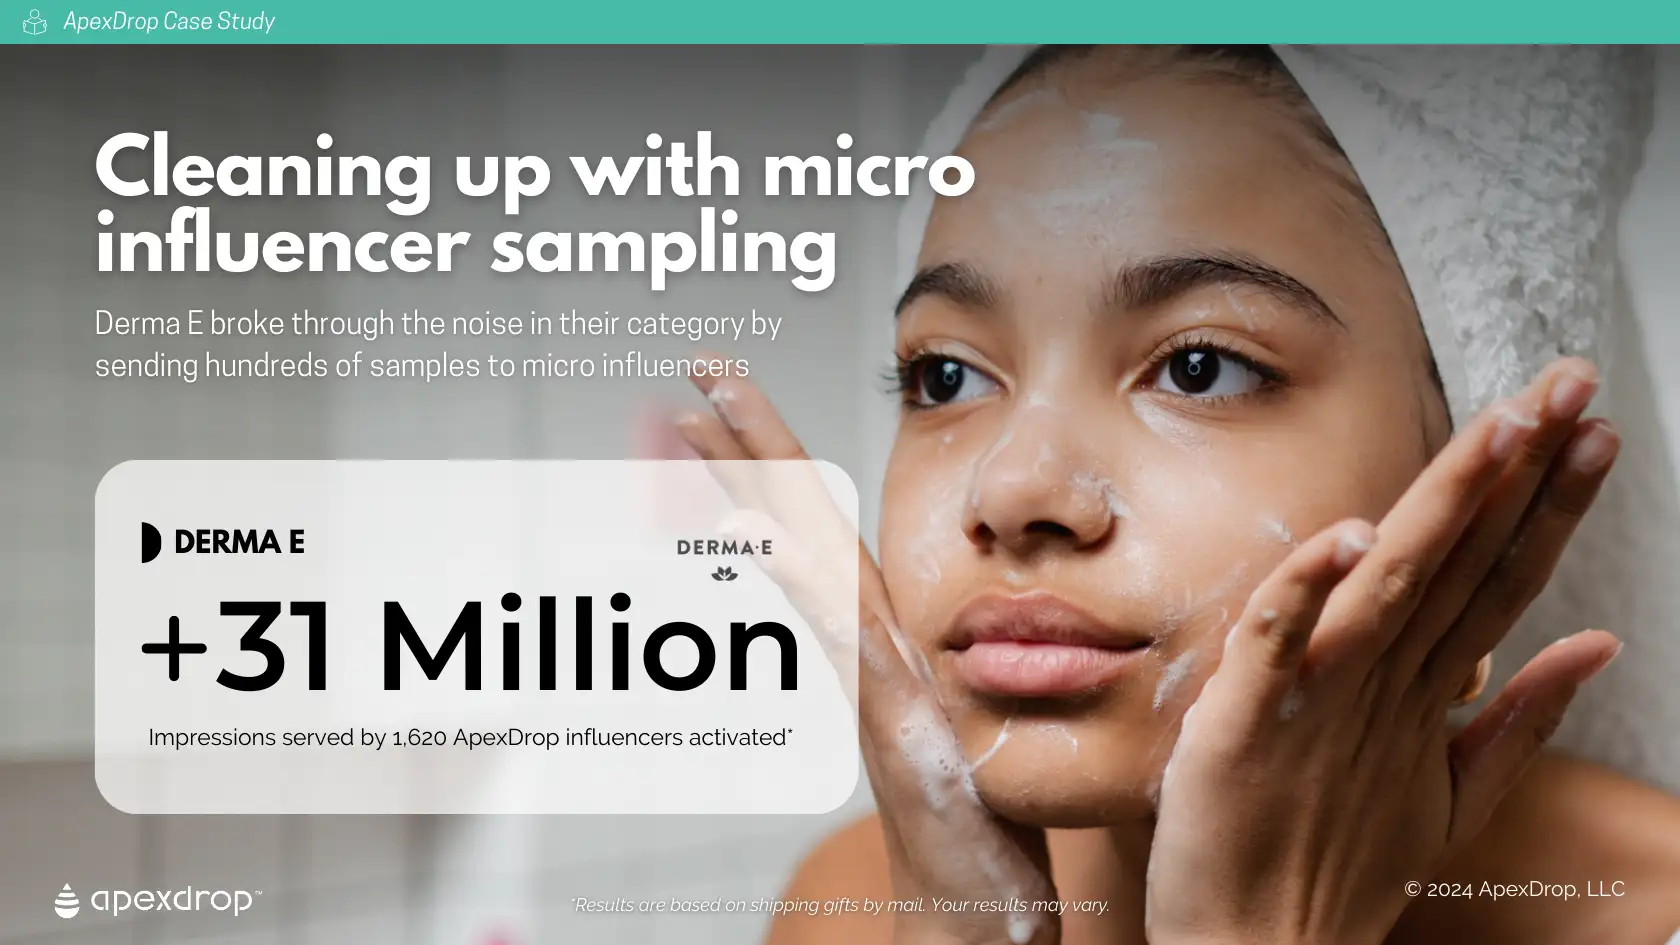 Cleaning Up with Micro Influencer Sampling - Derma E broke through the noise in their category by sending hundreds of samples to micro influencers.